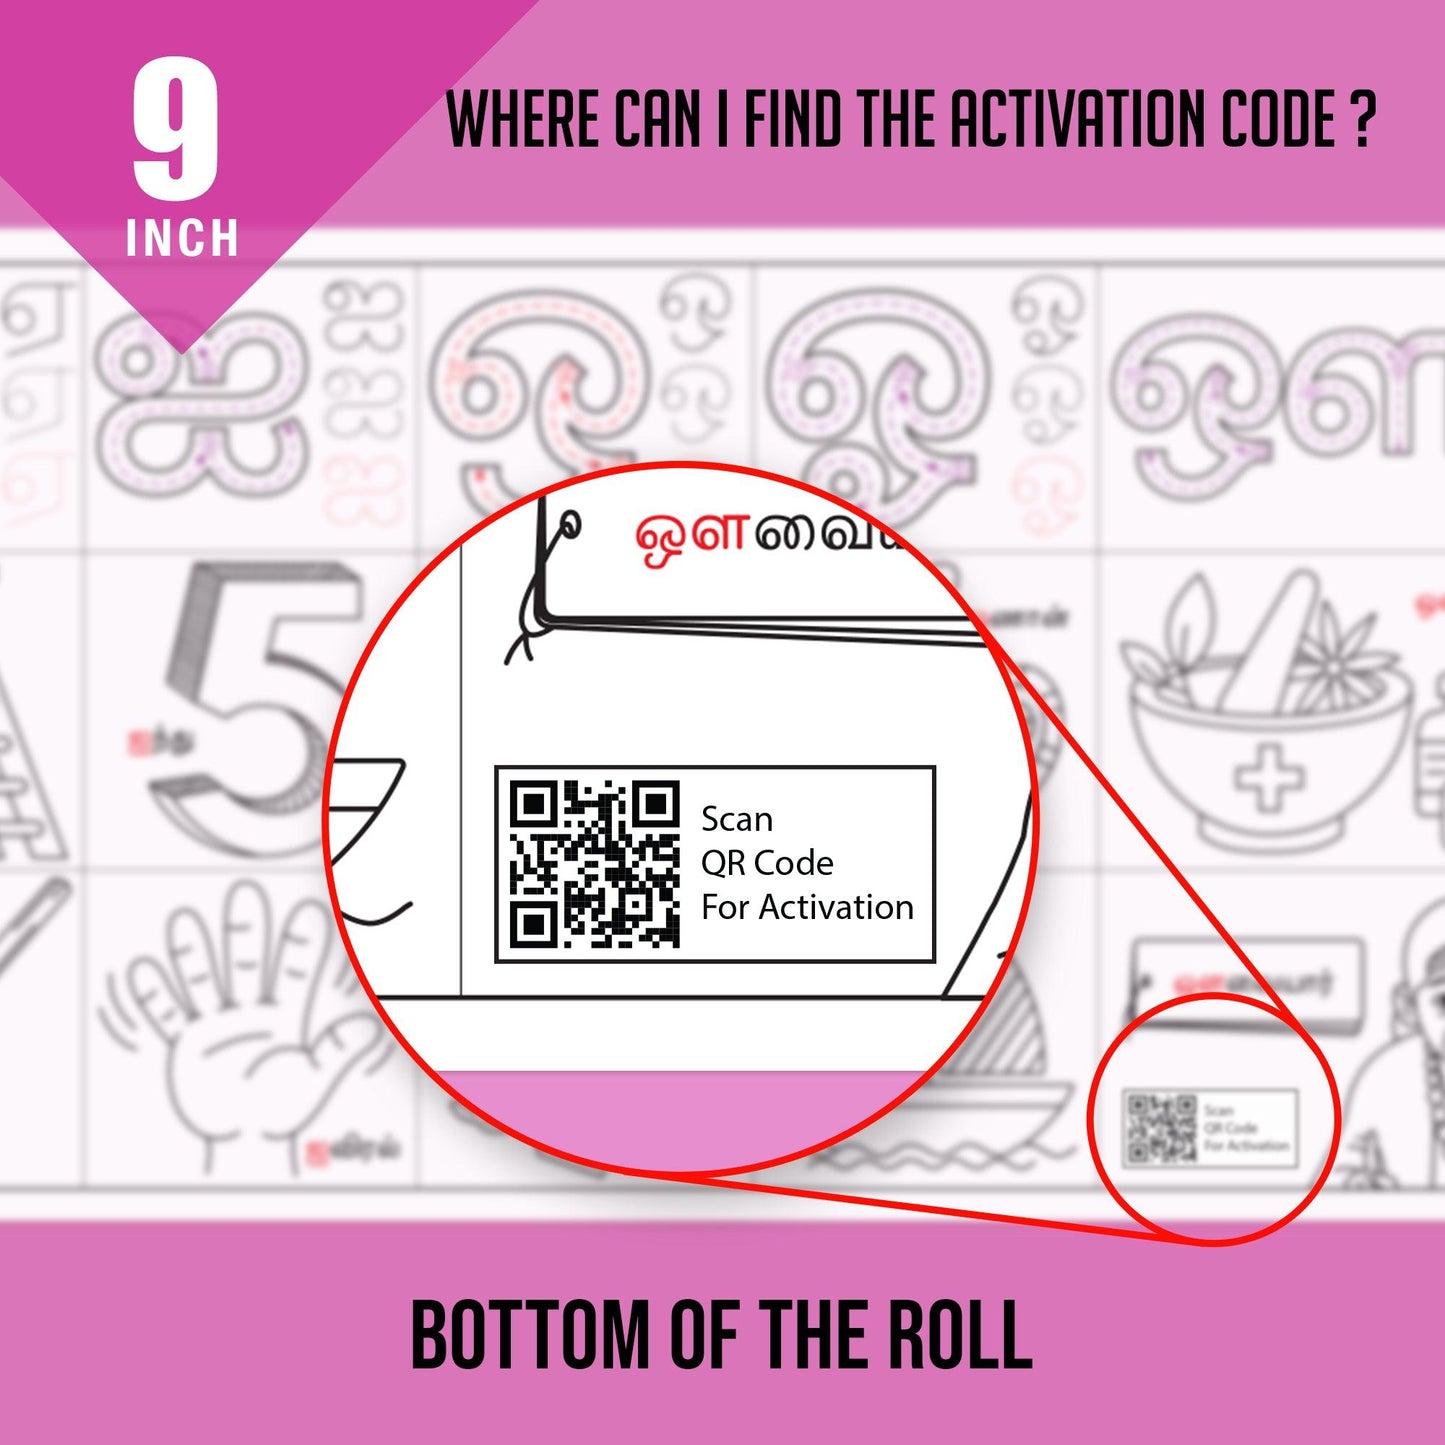 The image depicts a pink background with an open roll placed on it, with an activation code zoomed in from the right bottom of the roll.